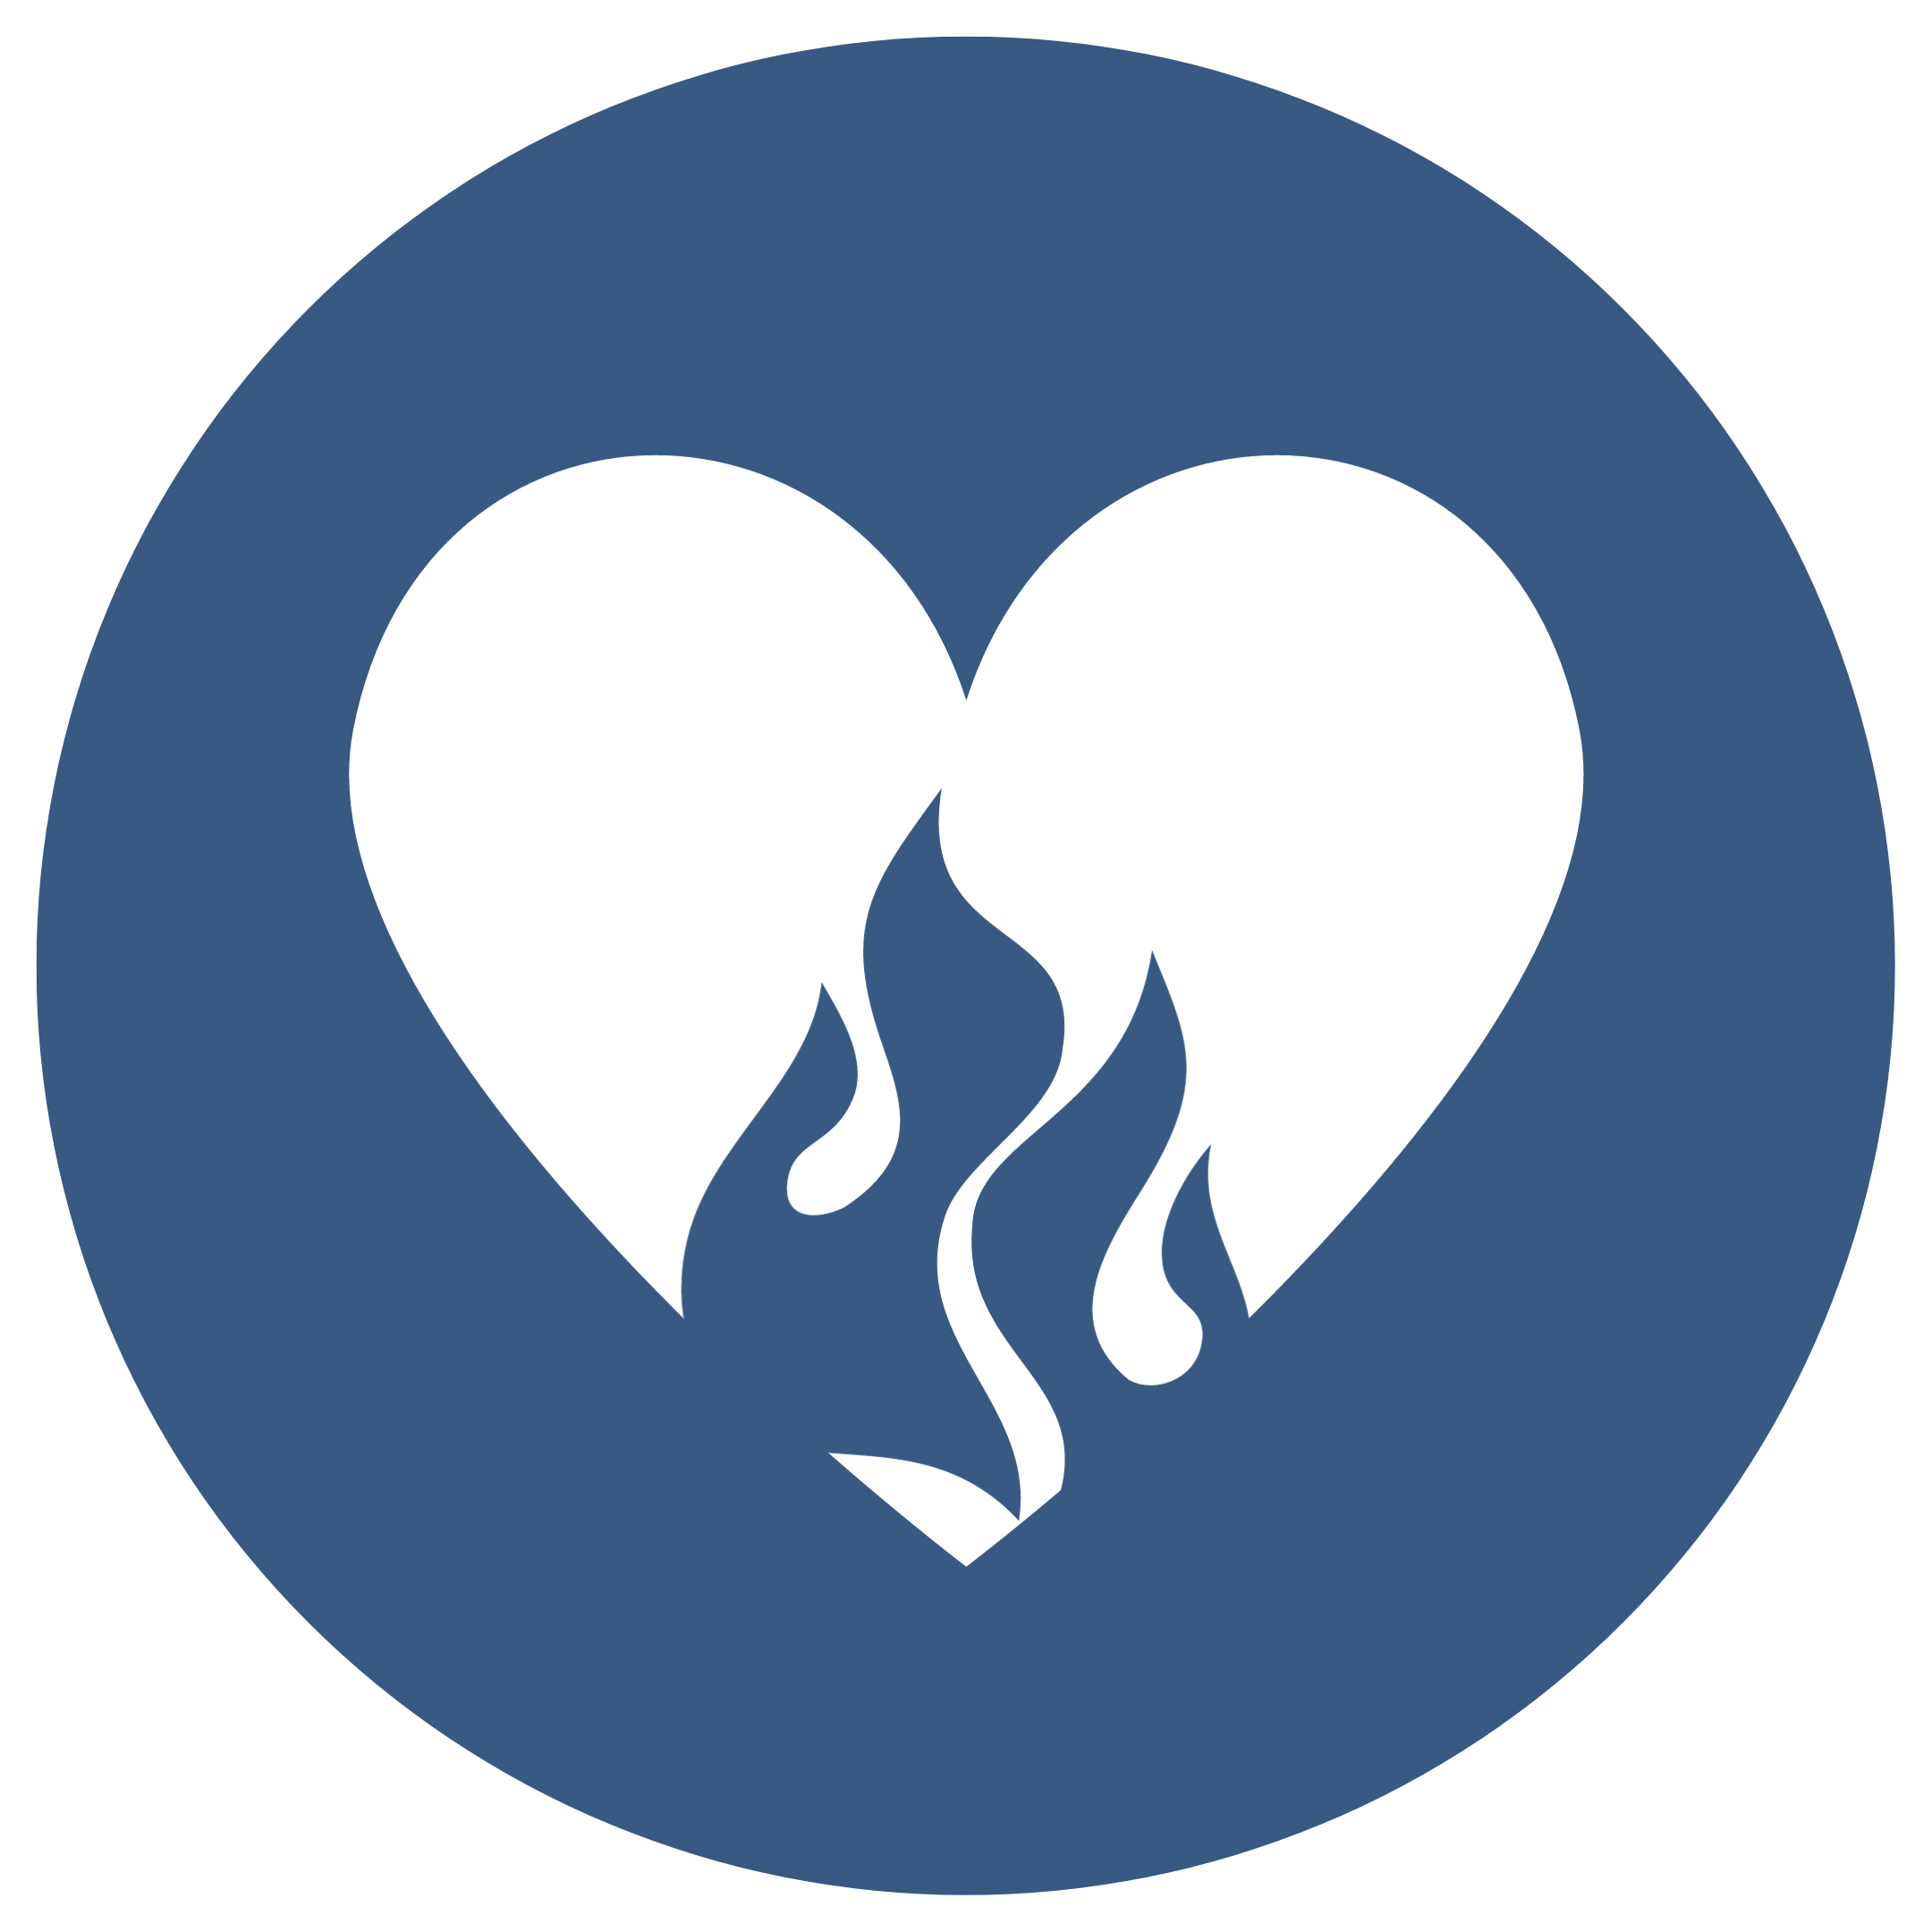 Candour Talent Recruitment Agency - About Us Page. Spotlighting Our Value: Drive. Illustrated by a Fire in Heart Icon, representing our relentless passion, determination, and motivation to go above and beyond in delivering exceptional recruitment solutions.